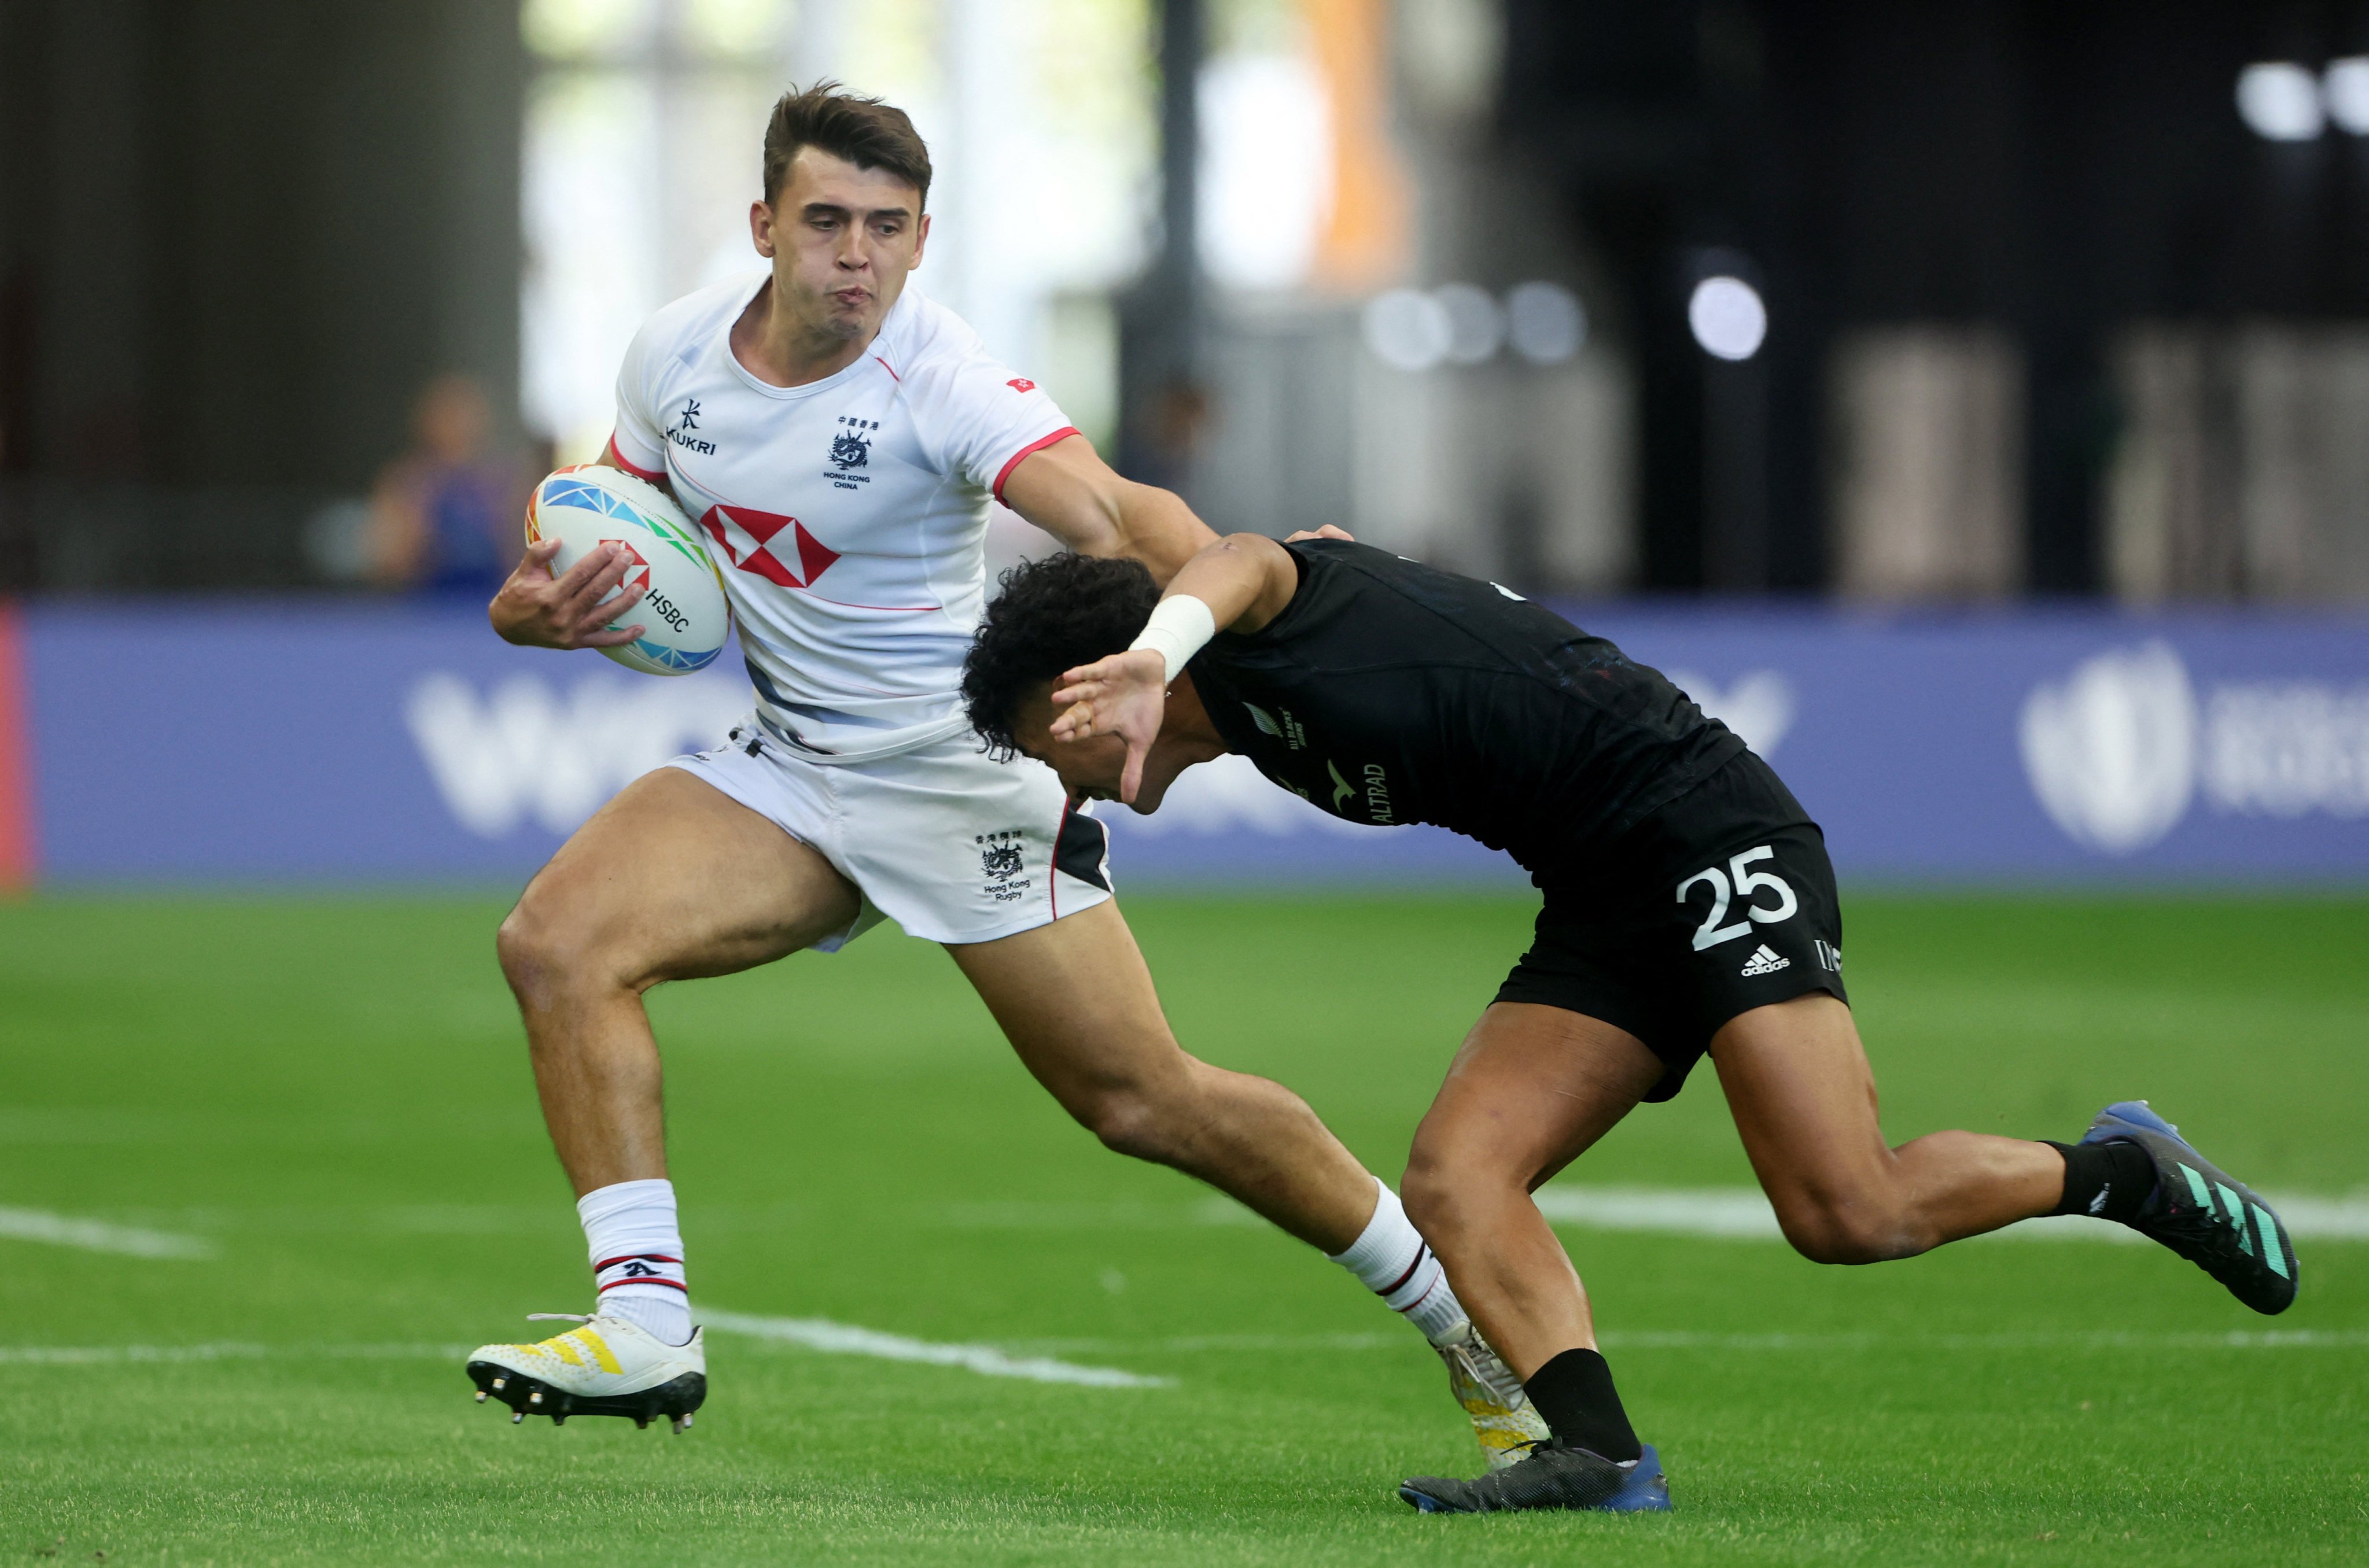 James Sawyer of Hong Kong is tackled by New Zealand’s Cody Vai at the Singapore Sevens. Photo: Reuters